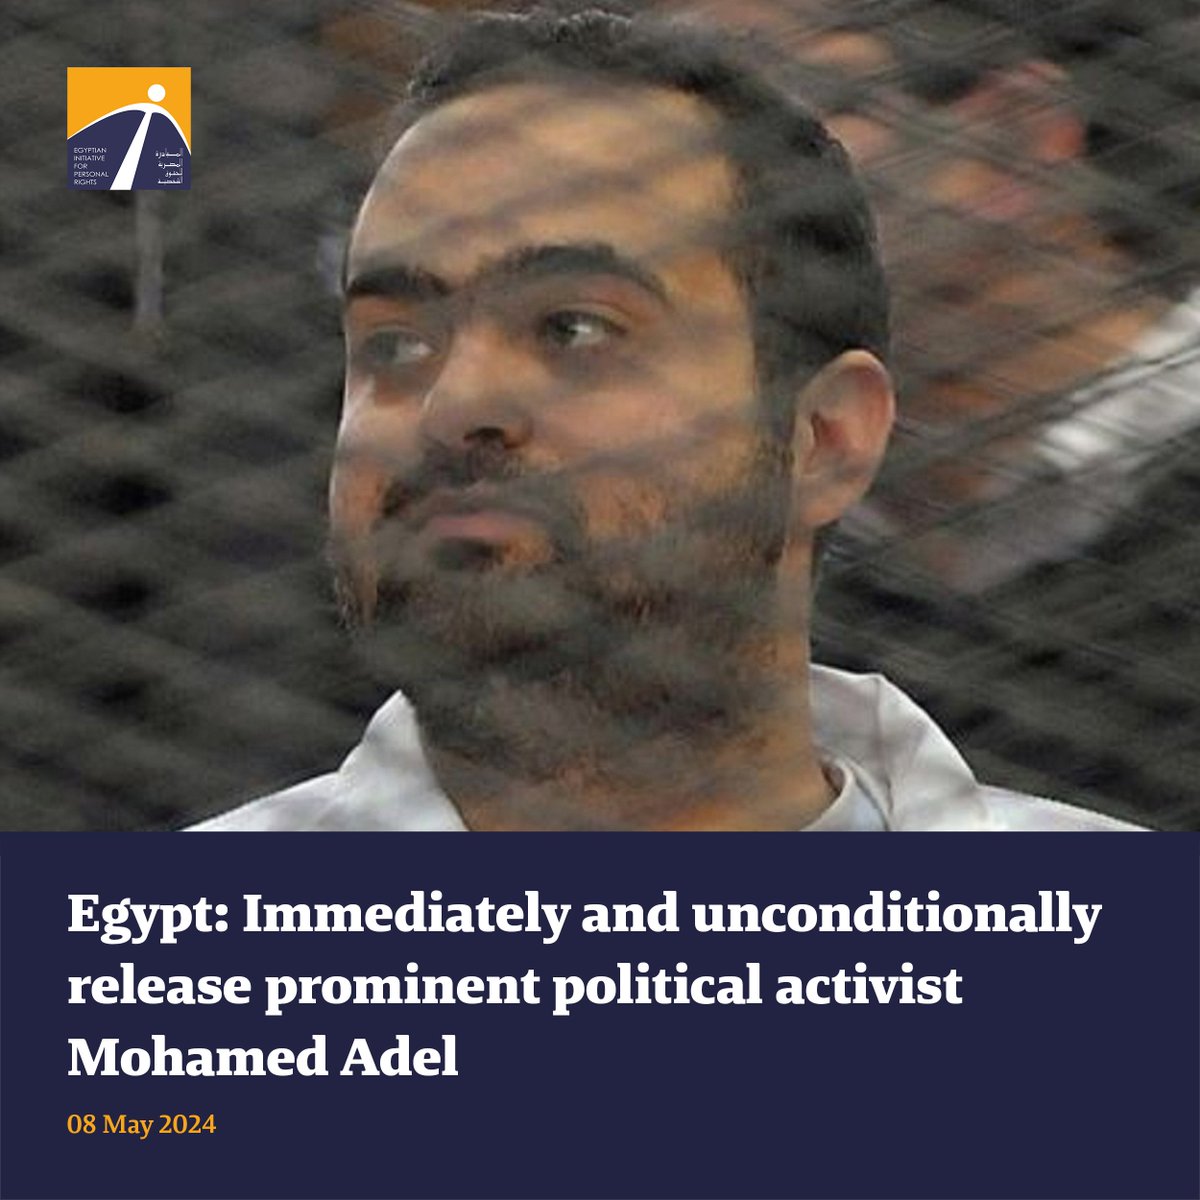 🟧 The undersigned human rights organizations reiterate their call on the Egyptian authorities to immediately and unconditionally release prominent political activist and former spokesperson of the April 6 Youth Movement, Mohamed Adel. 🔗 Full statement: tinyurl.com/4z3snv3h